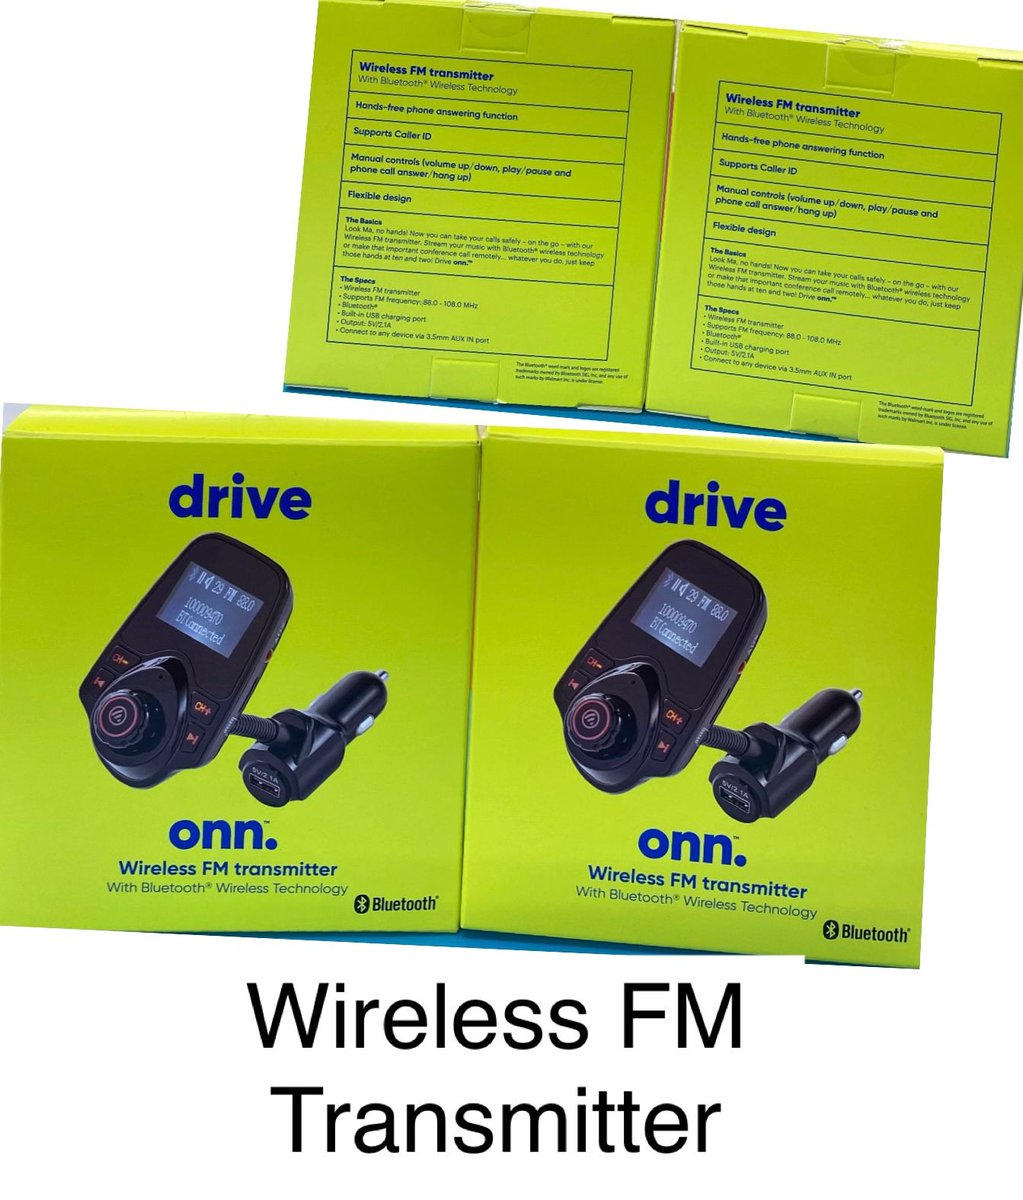 Onn. Drive Wireless FM Transmitter is ready to Ship from #Bronx. Click the link to Order Now: icwholesale.com/products/onn-w…
Call Us: +1-718-684-4848 or WhatsApp: +1-347-282-1849
#wirelessfmtransmitter #onn #transmitter #Newyork #NYC #Bronxny #carcharger #charger #chargers #accessories